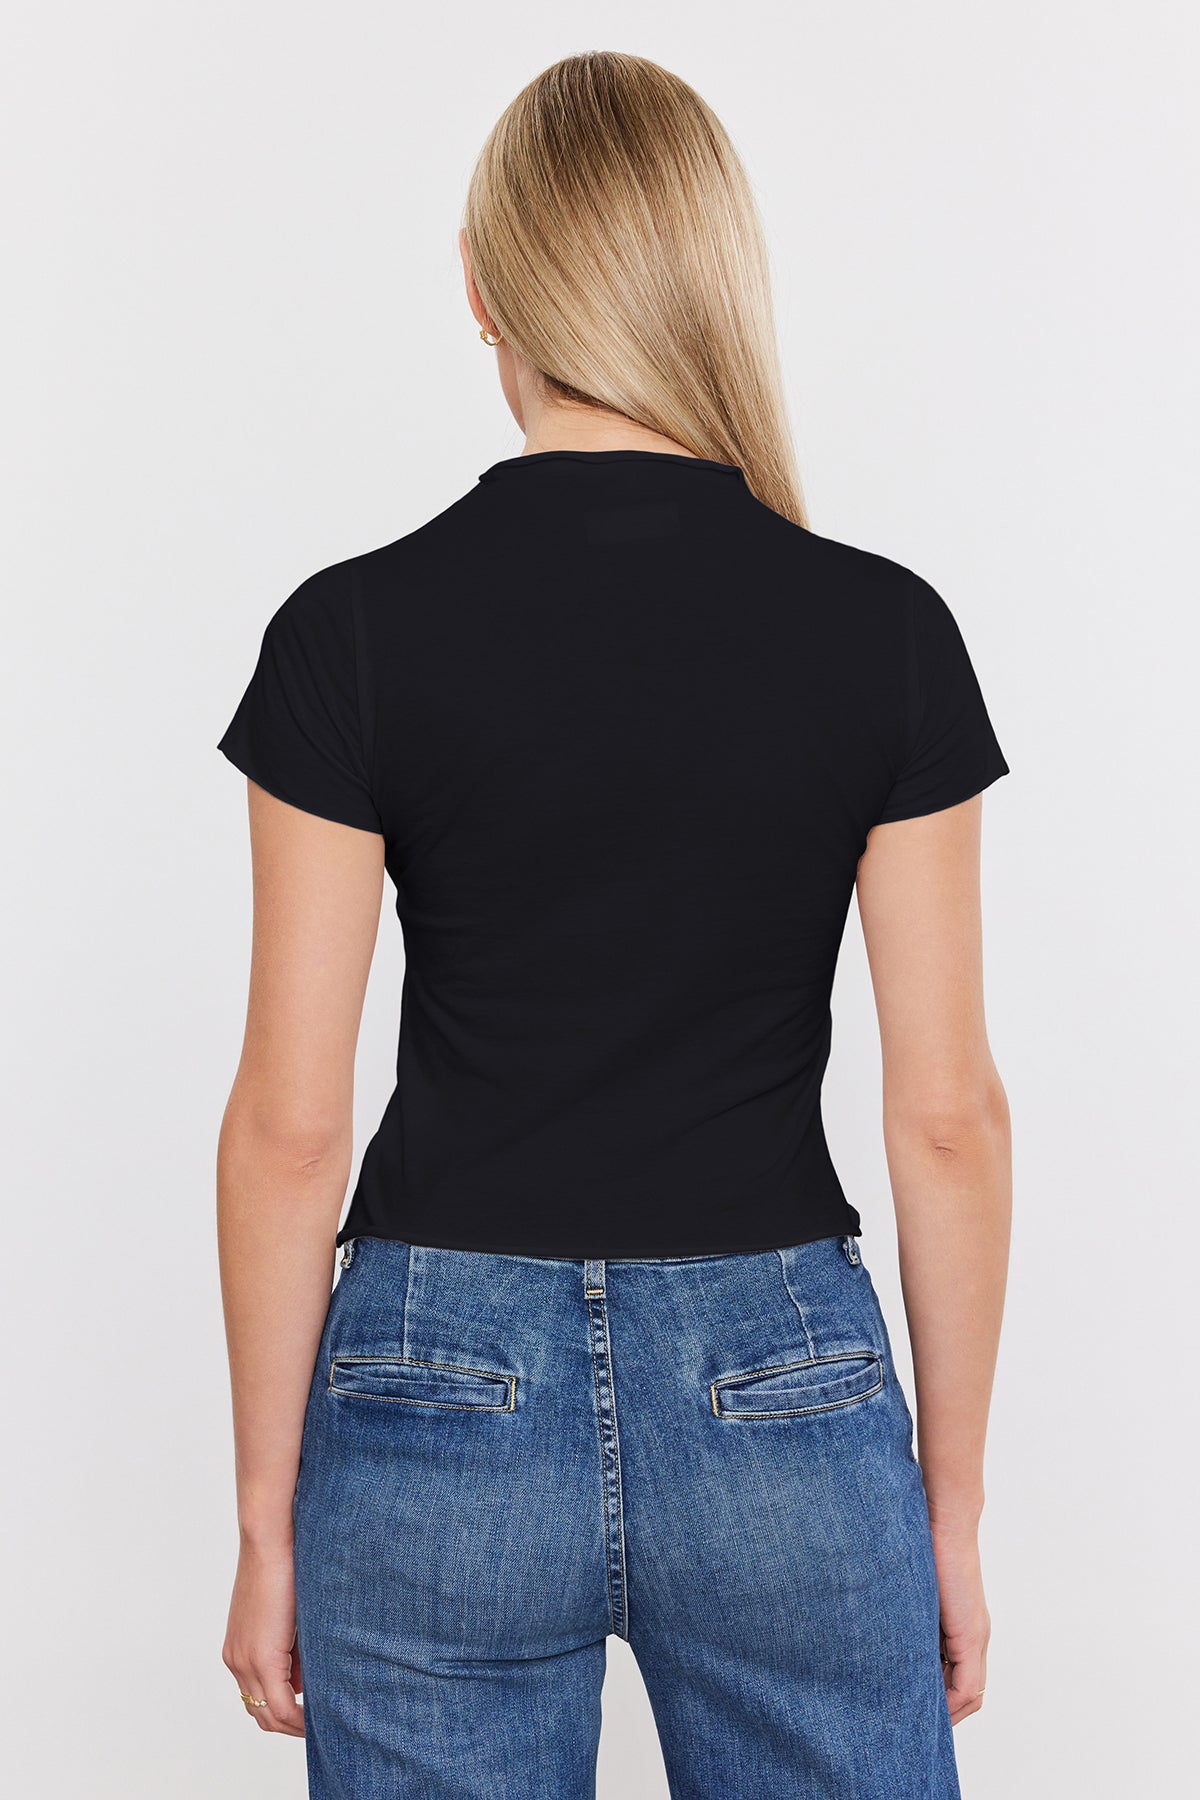   Woman viewed from behind wearing a black Velvet by Graham & Spencer JACKIE MOCK NECK TEE and blue jeans, standing against a white background. 